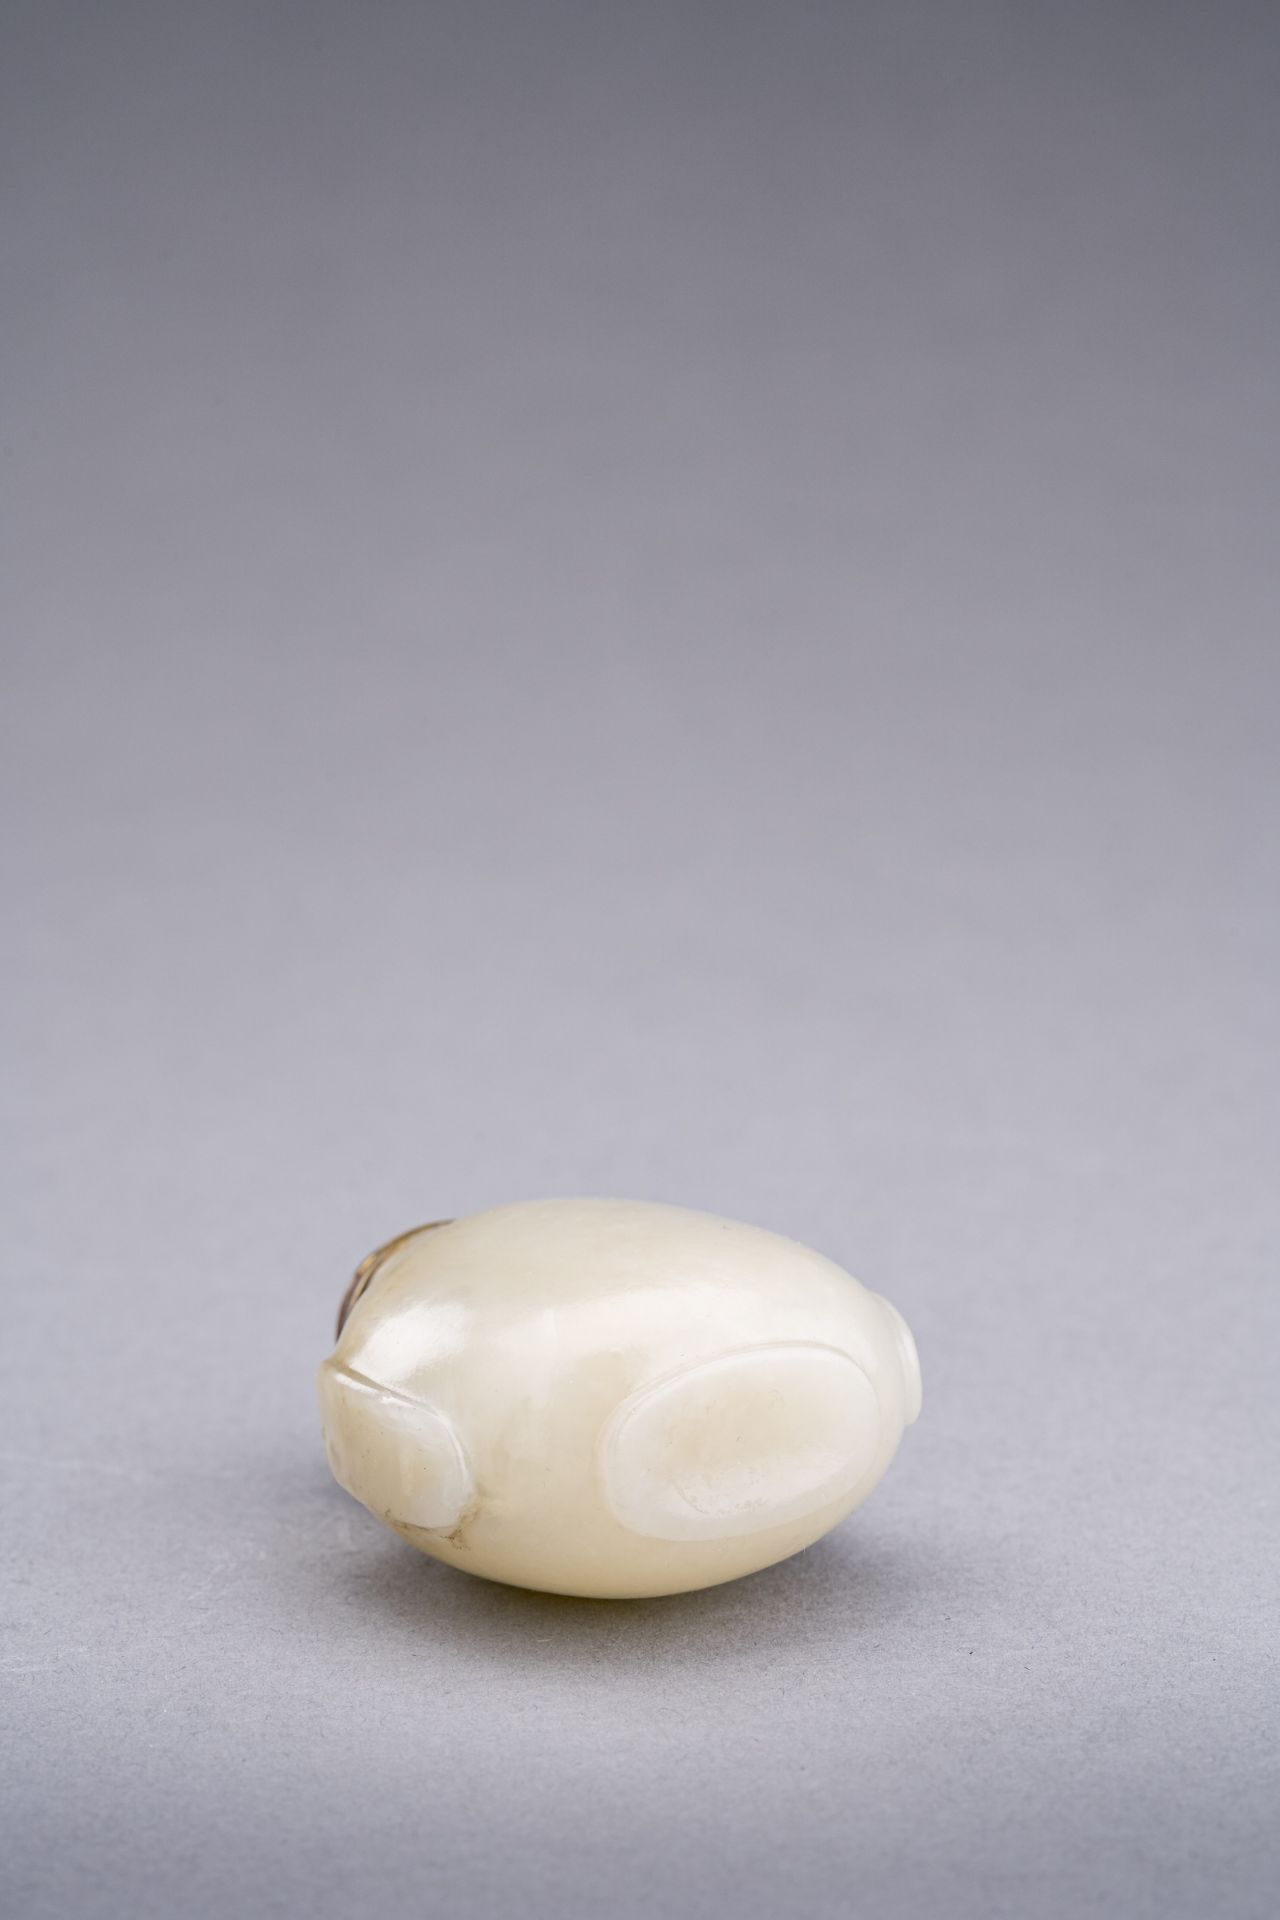 A CELADON JADE SNUFF BOTTLE, QING DYNASTY - Image 6 of 6